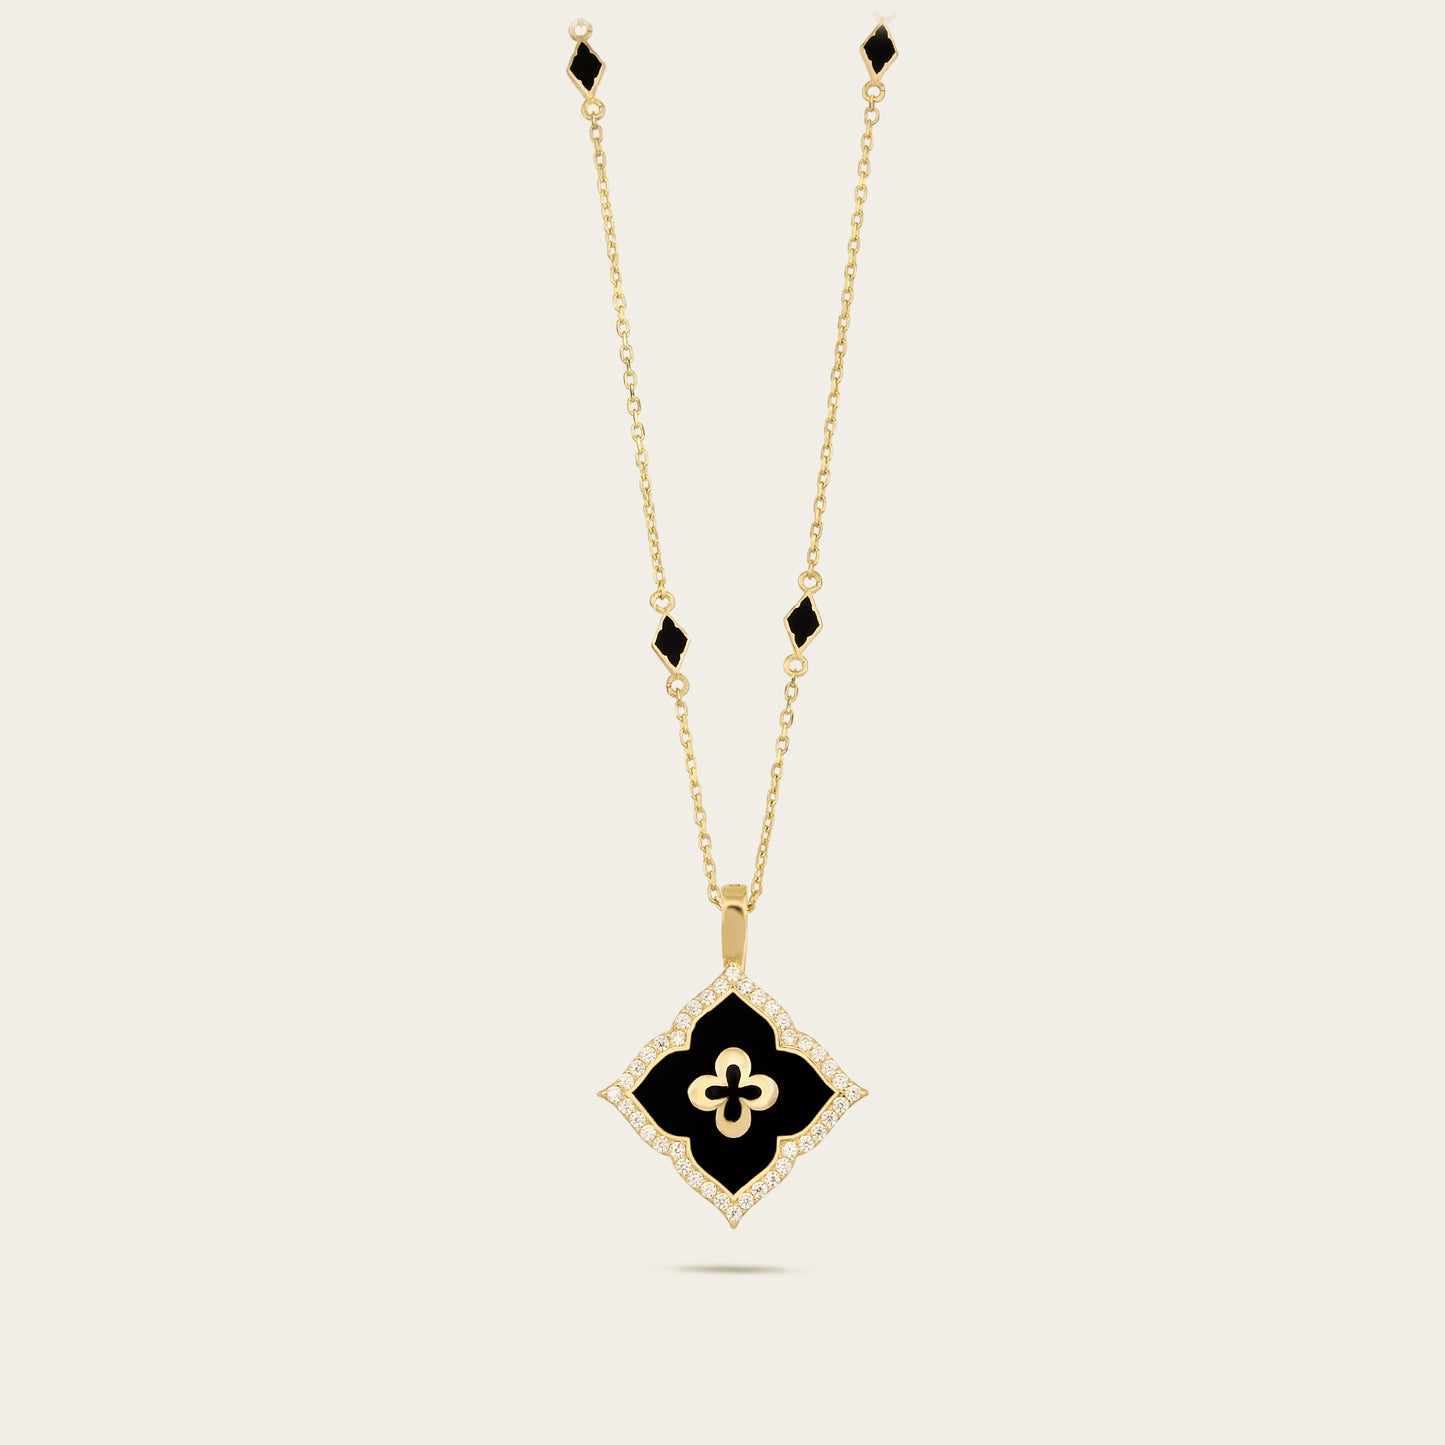 noorelle, enigma fine necklace, jewellery, necklace, gold chain necklace, black and gold necklace